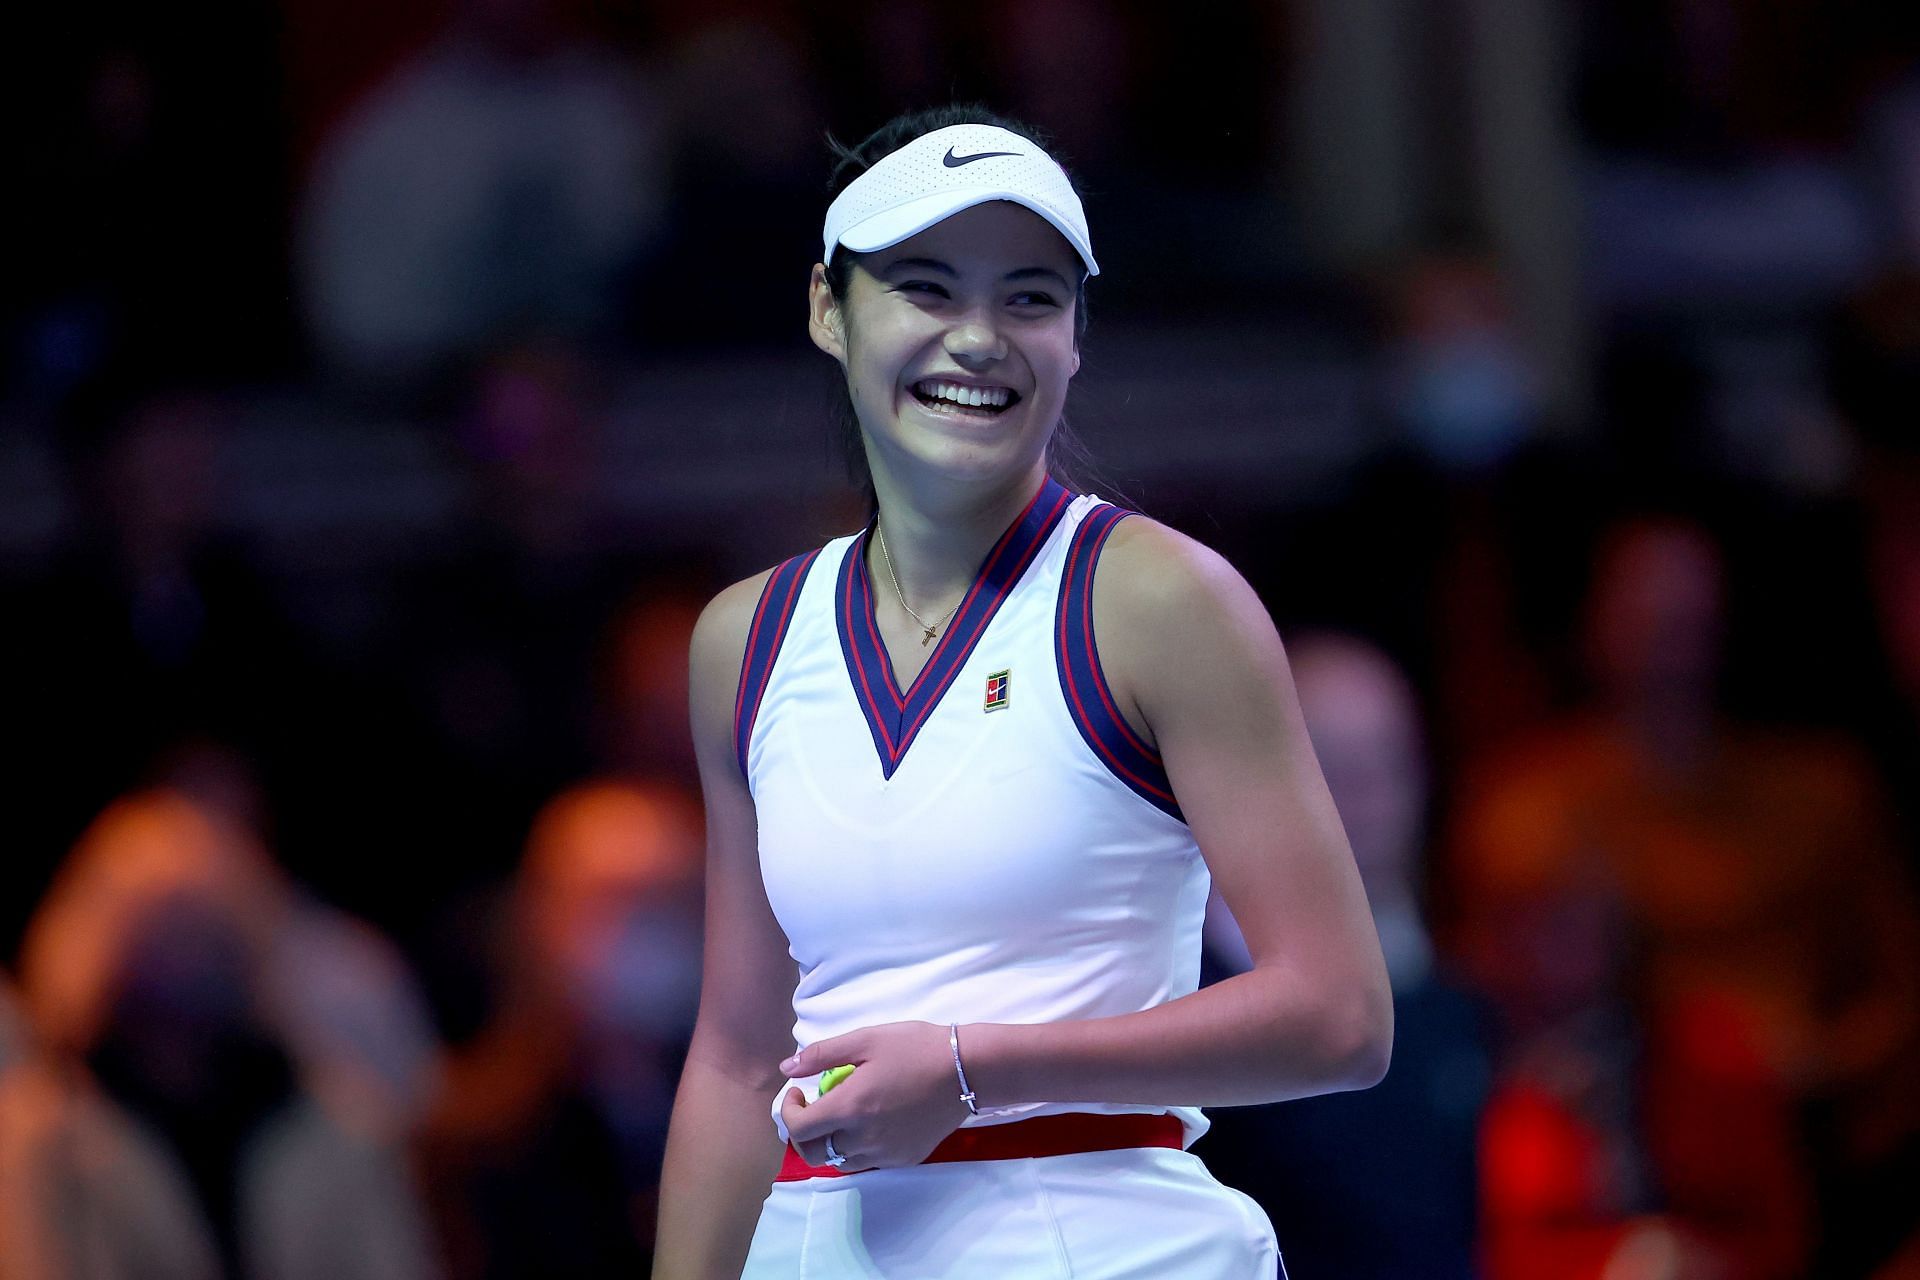 Emma Raducanu recently played an exhibition match at The Royal Albert Hall in London